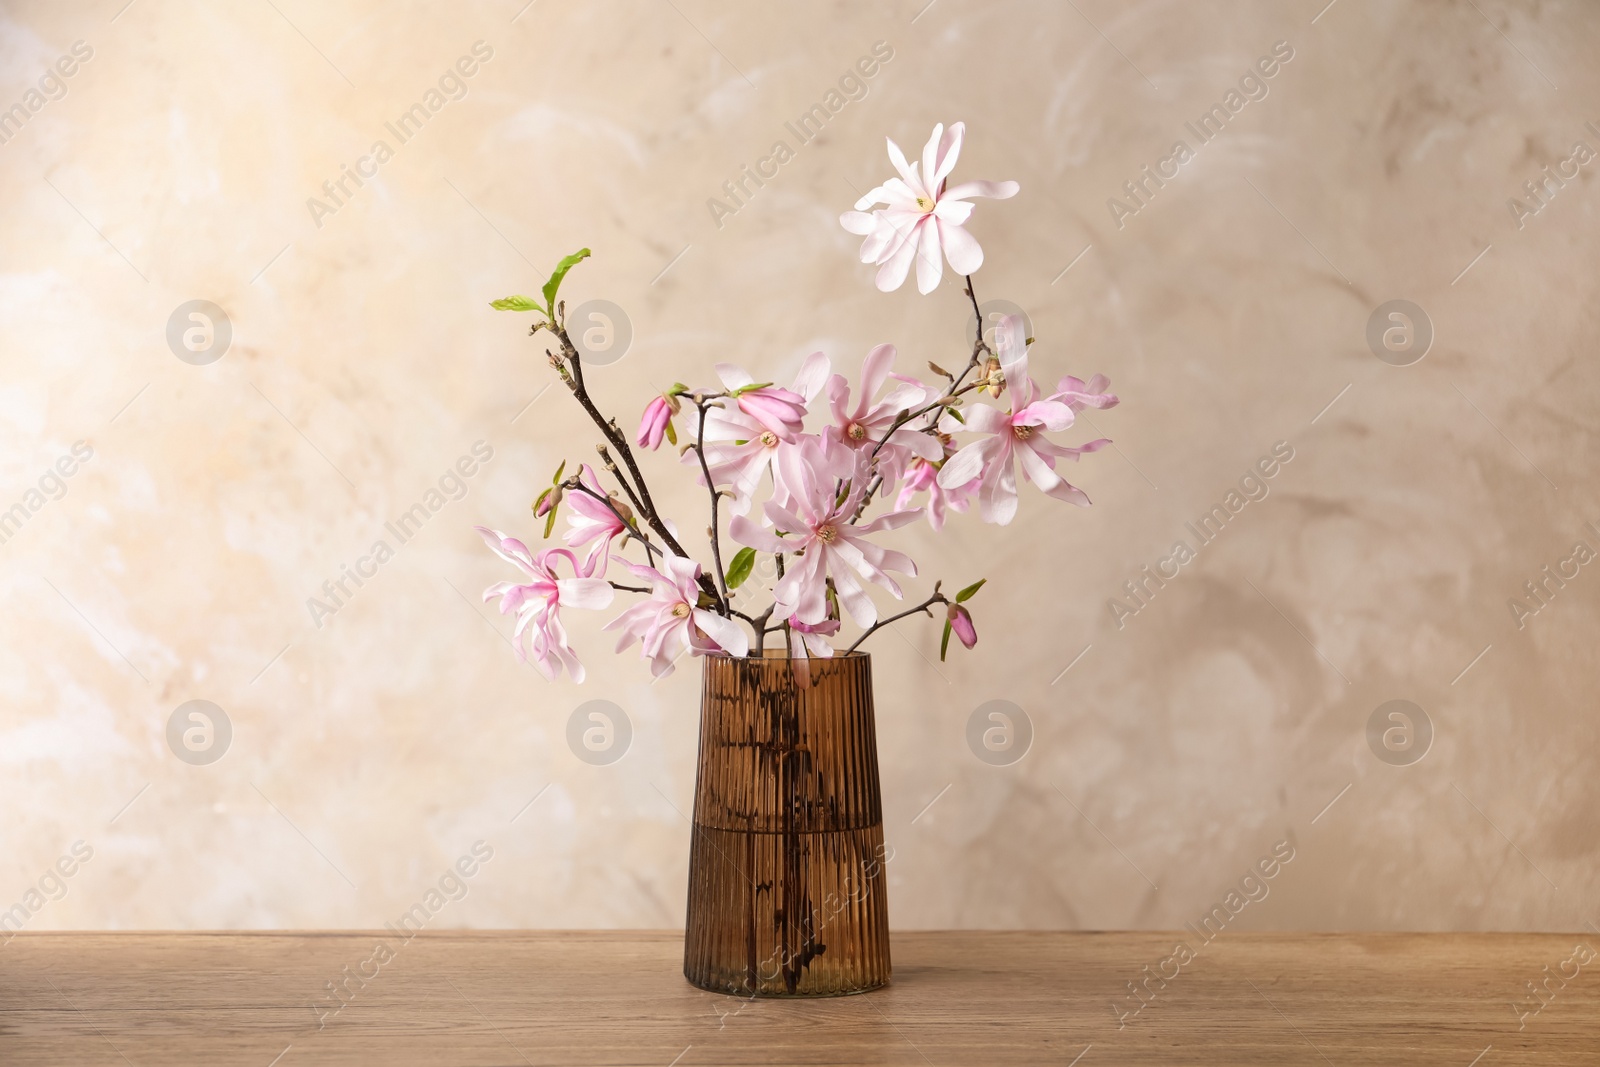 Photo of Magnolia tree branches with beautiful flowers in glass vase on wooden table against beige background